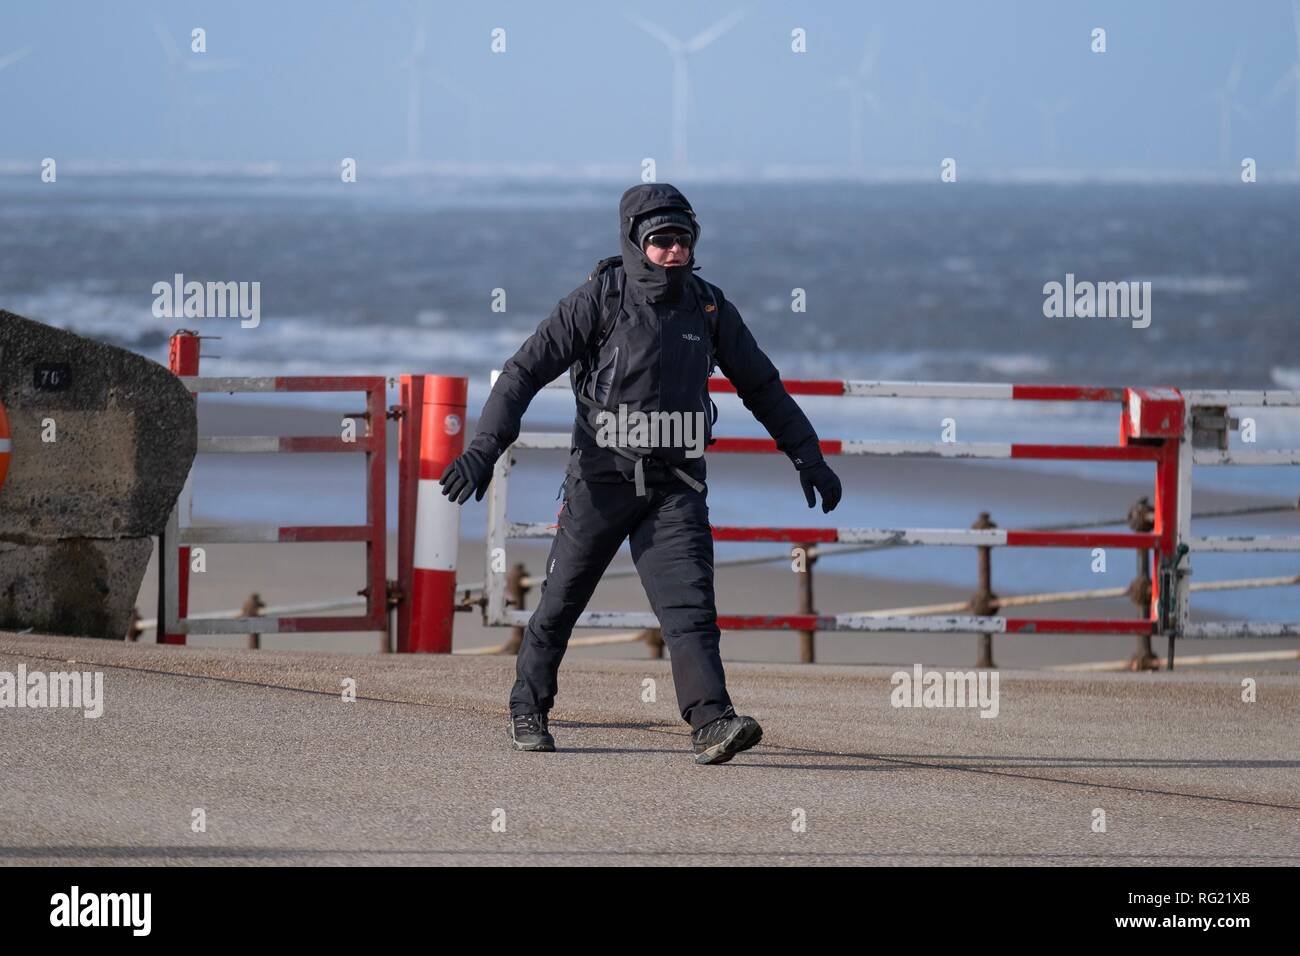 New Brighton, Wirral, UK. 27th January, 2019. People struggling in the windy weather conditions at New Brighton promenade on the Wirral on Sunday, January 27, 2019. Credit: Christopher Middleton/Alamy Live News Stock Photo